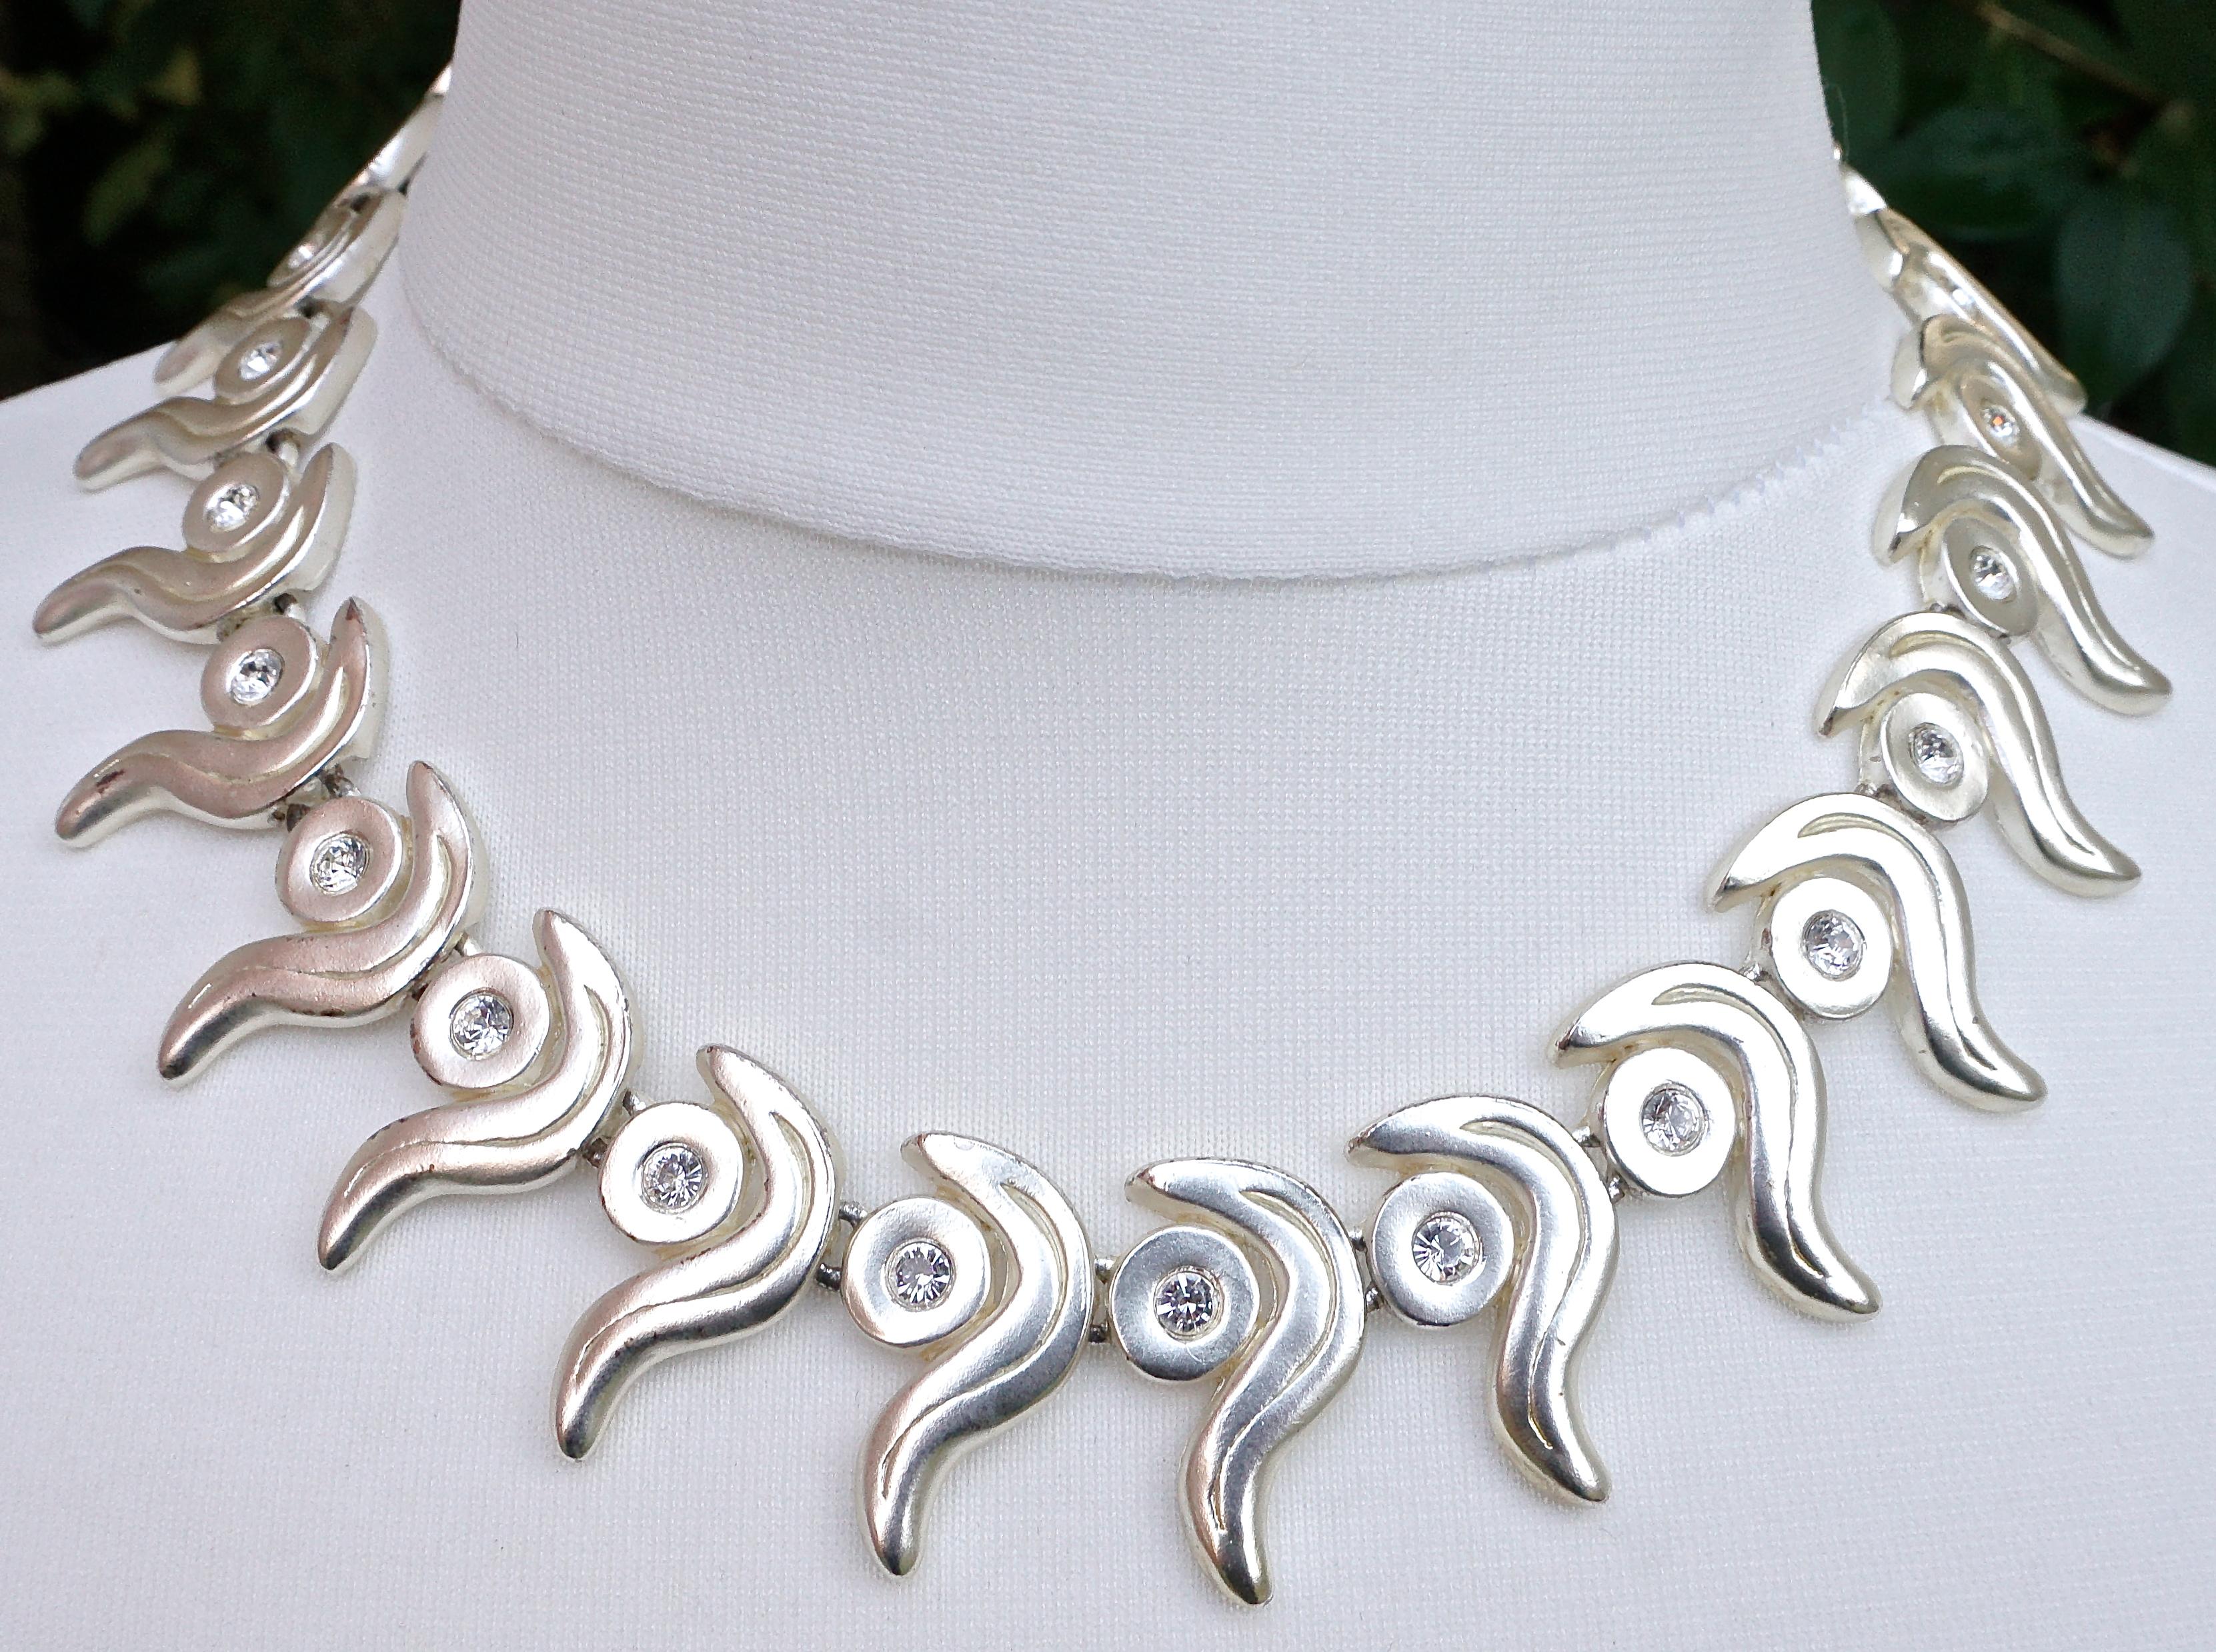 Women's Silver Tone Swirl Design and Clear Rhinestones Link Necklace and Clip Earrings For Sale